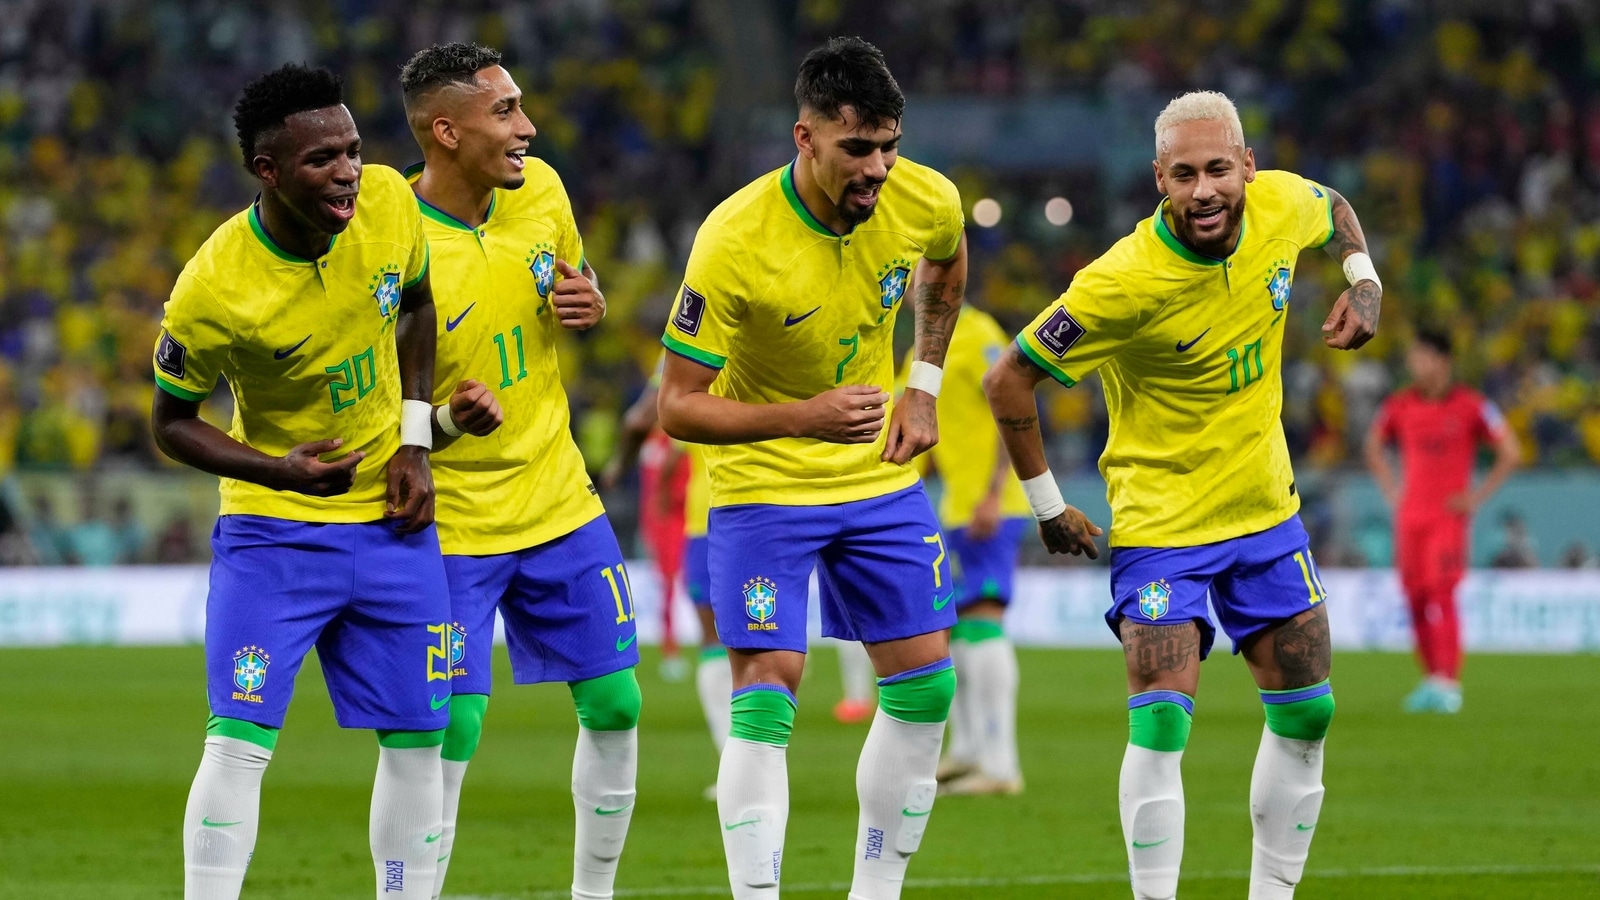 Brazil is dominating the World Cup and making it look fun